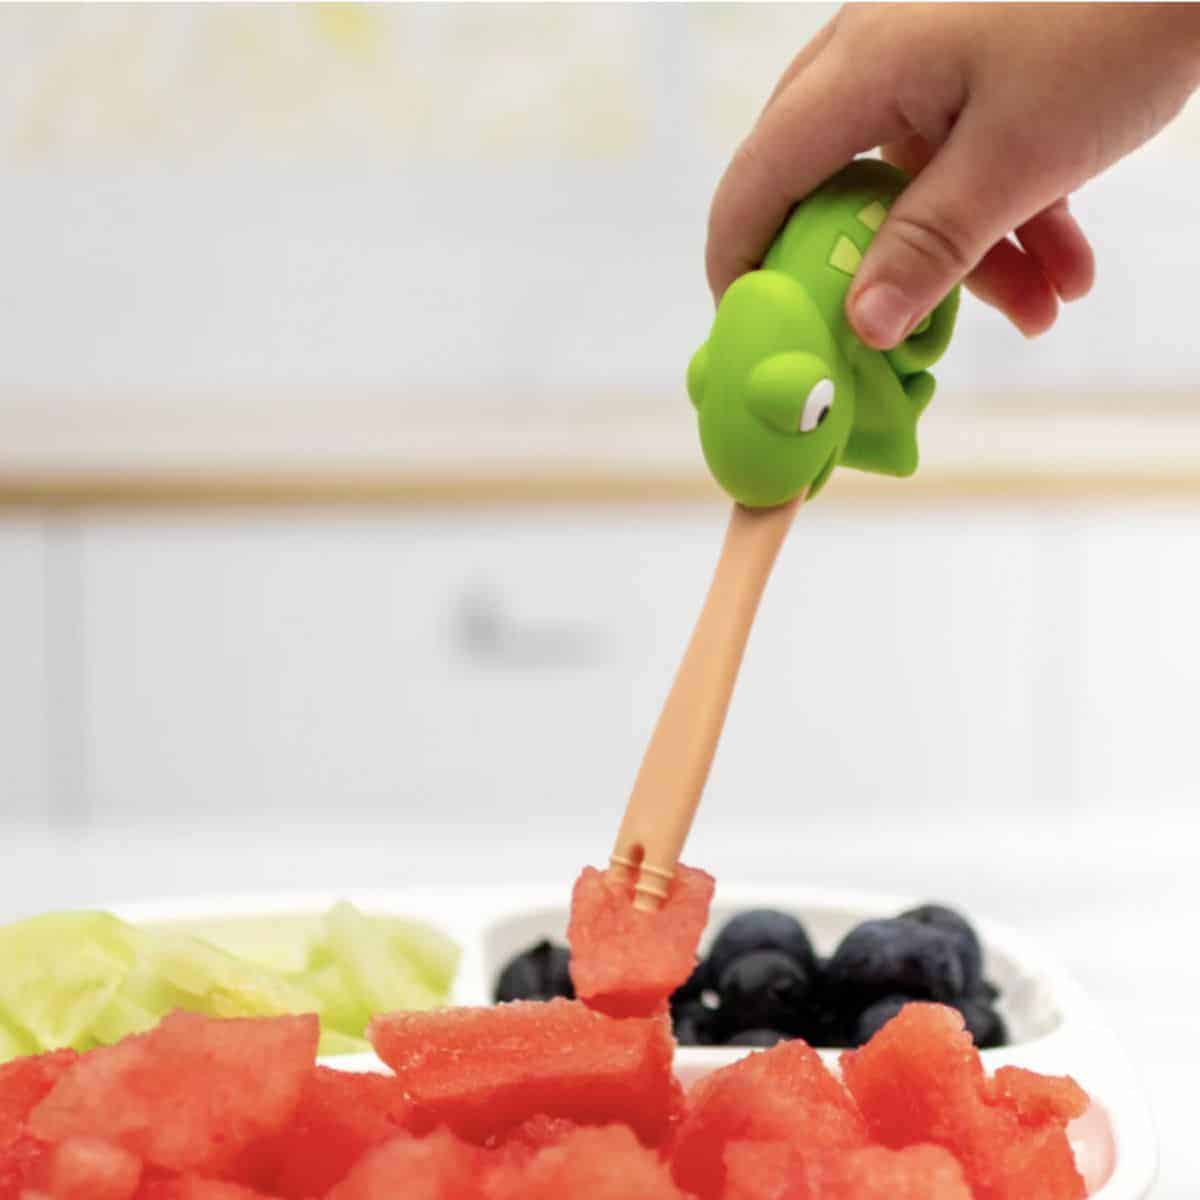 Picky eating can feel like a huge burden on parents, but Dabbldoo's fun food picks and brush are helpful tools to help kids explore and eat new foods!